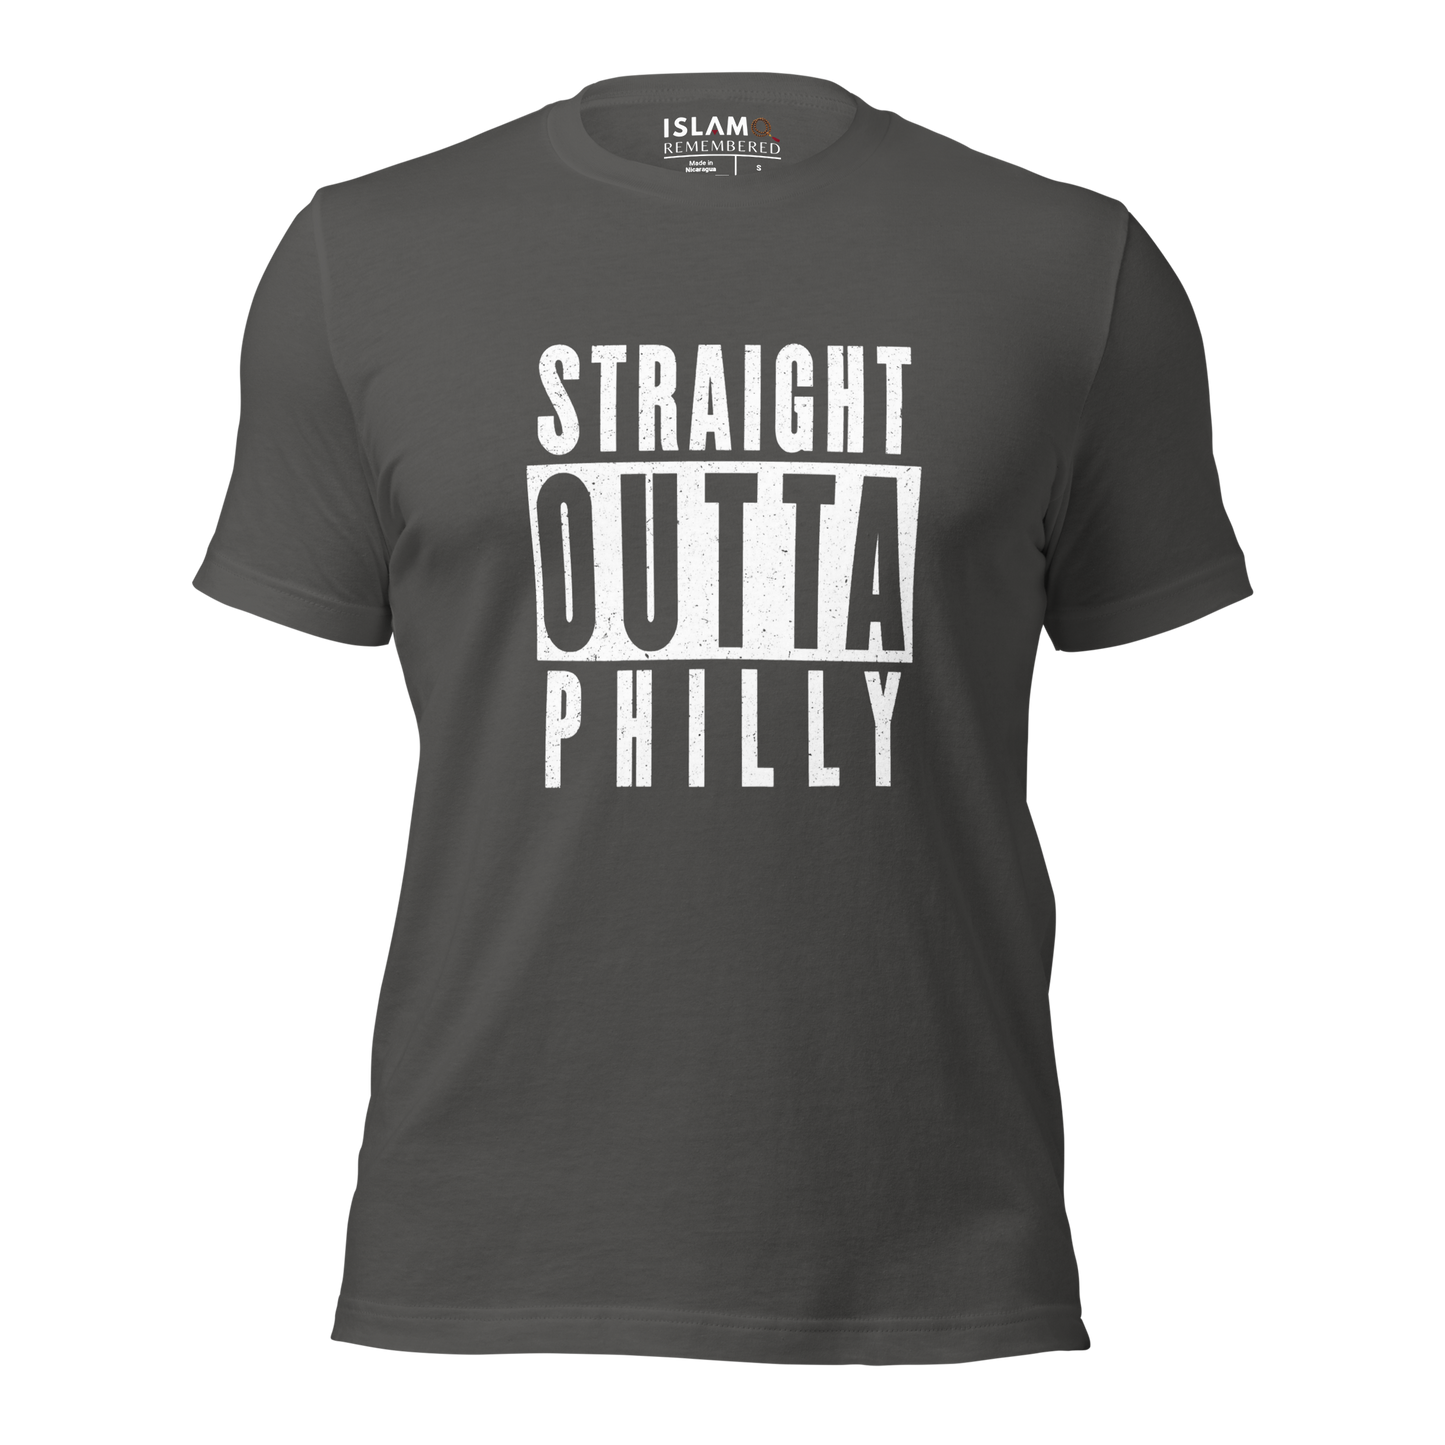 ADULT T-Shirt - STRAIGHT OUTTA PHILLY